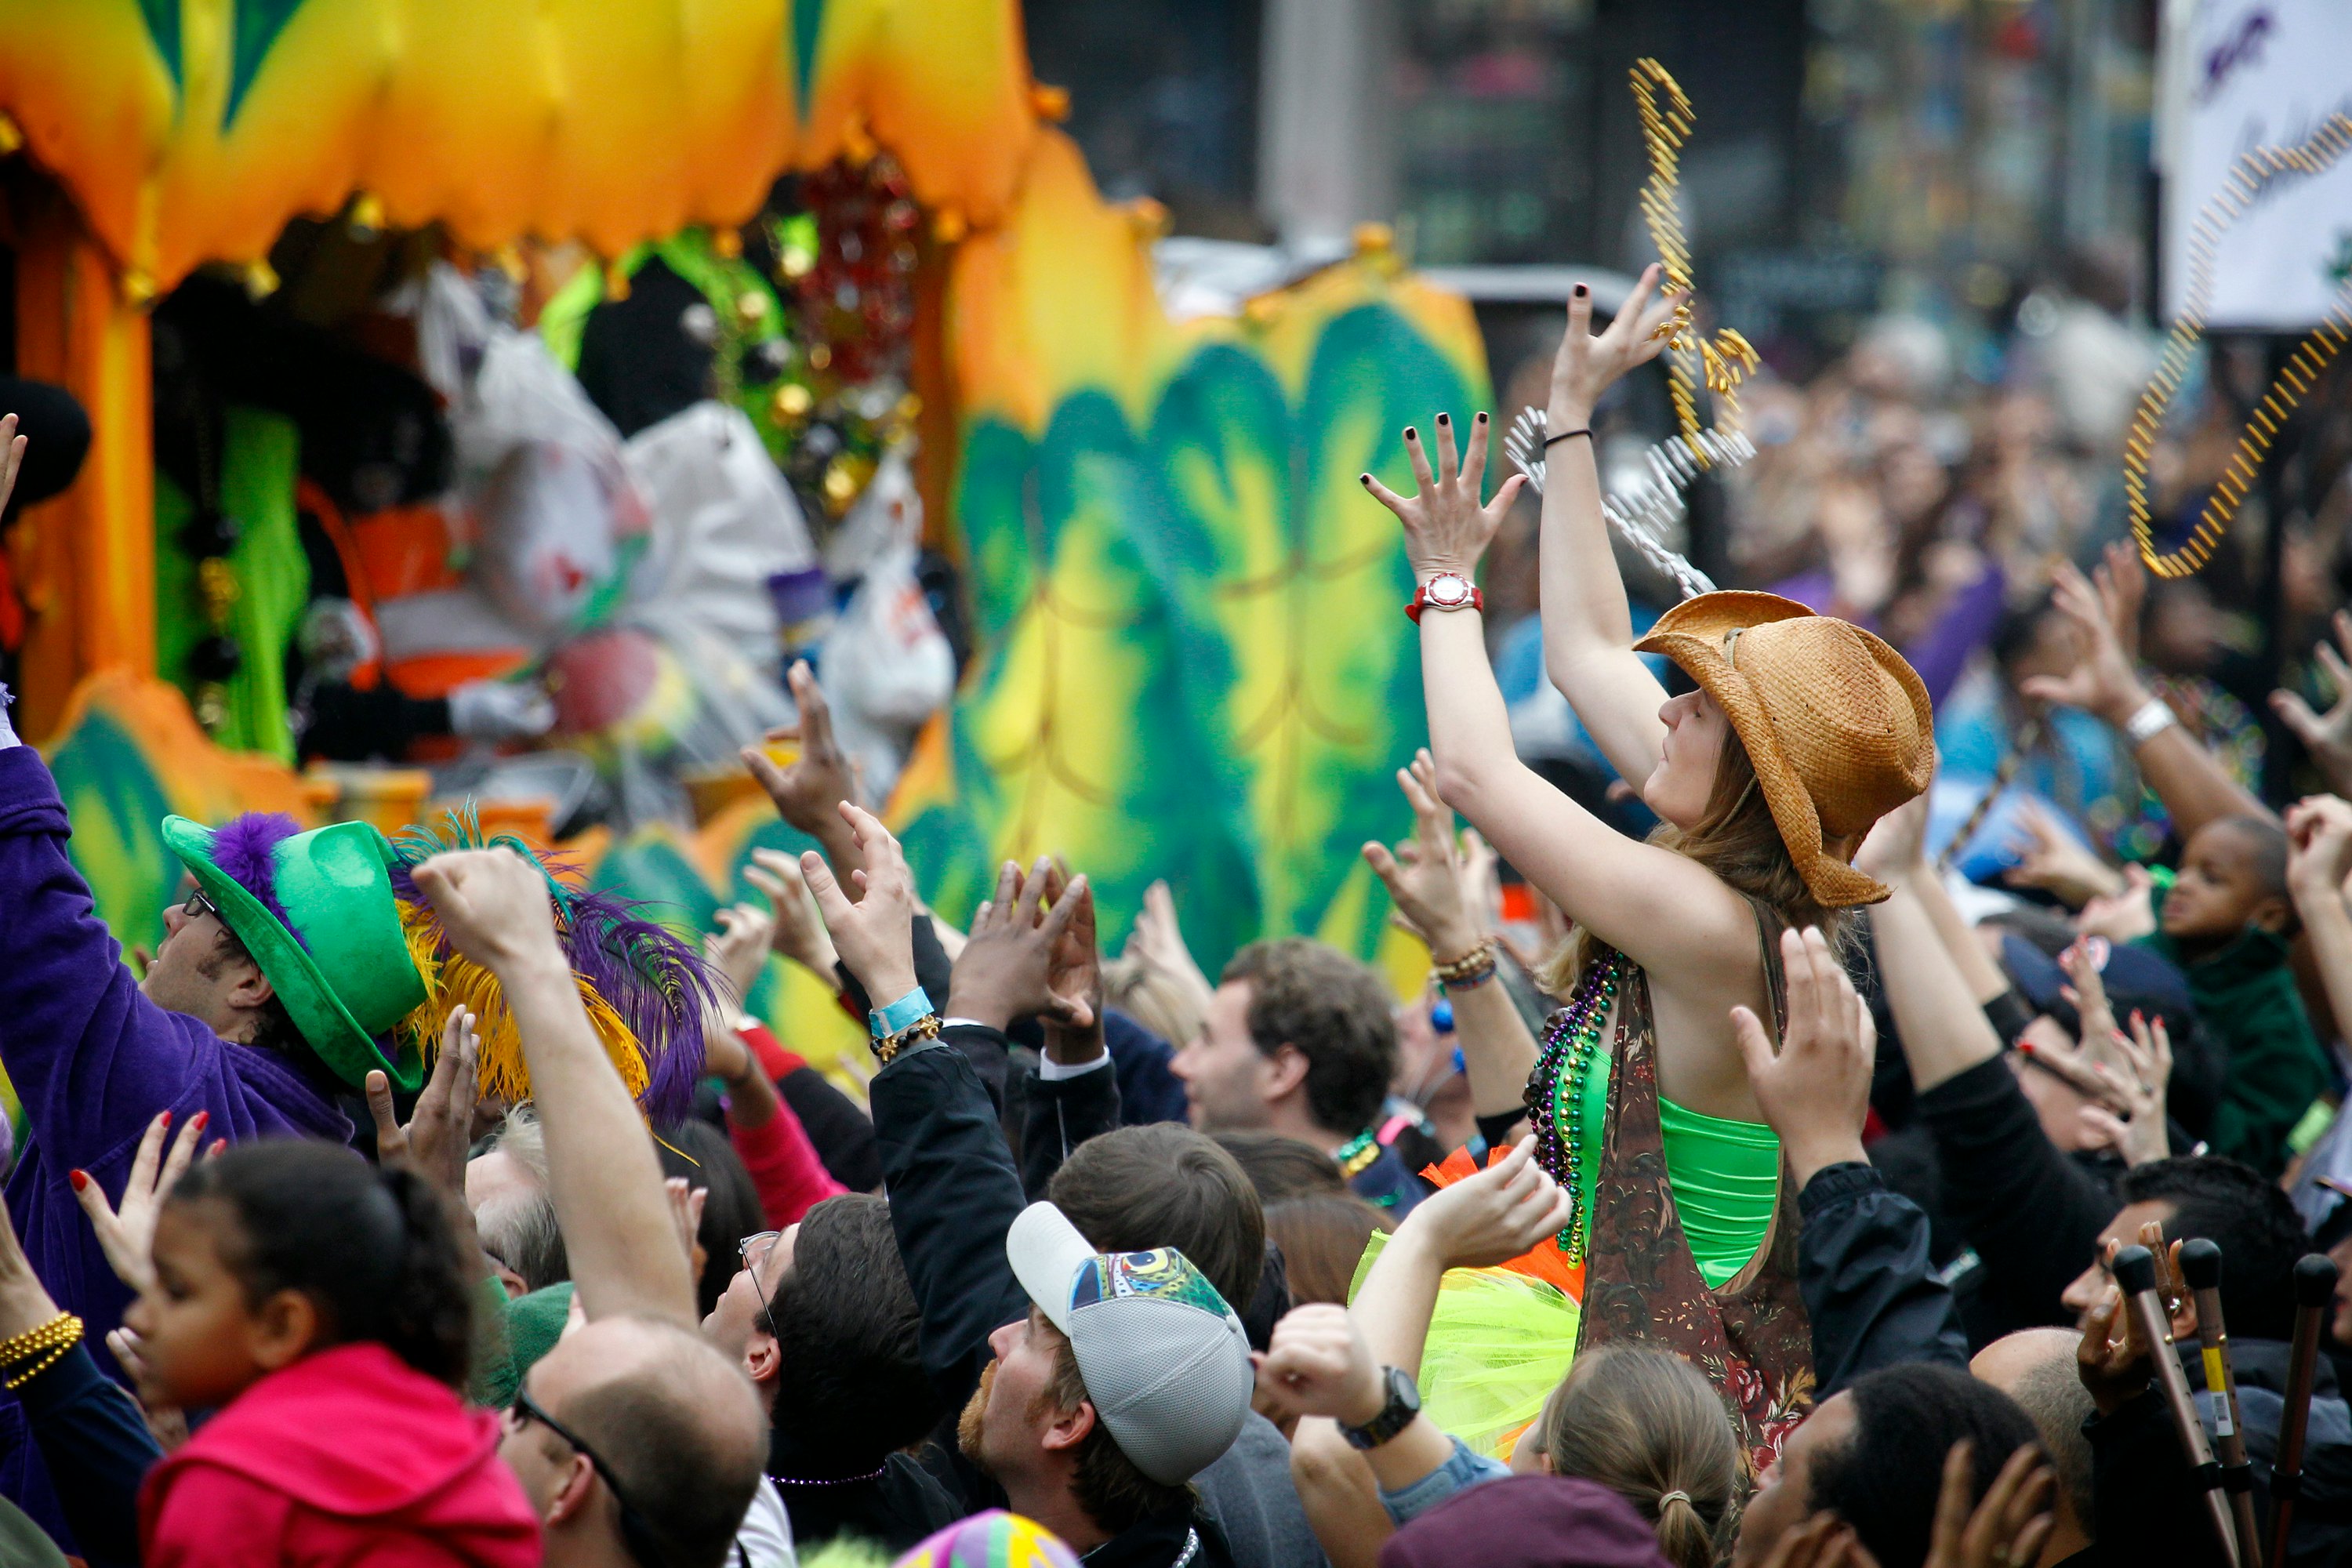 Why Do Women Flash Their Breasts For Beads At Mardi Gras? A Brief